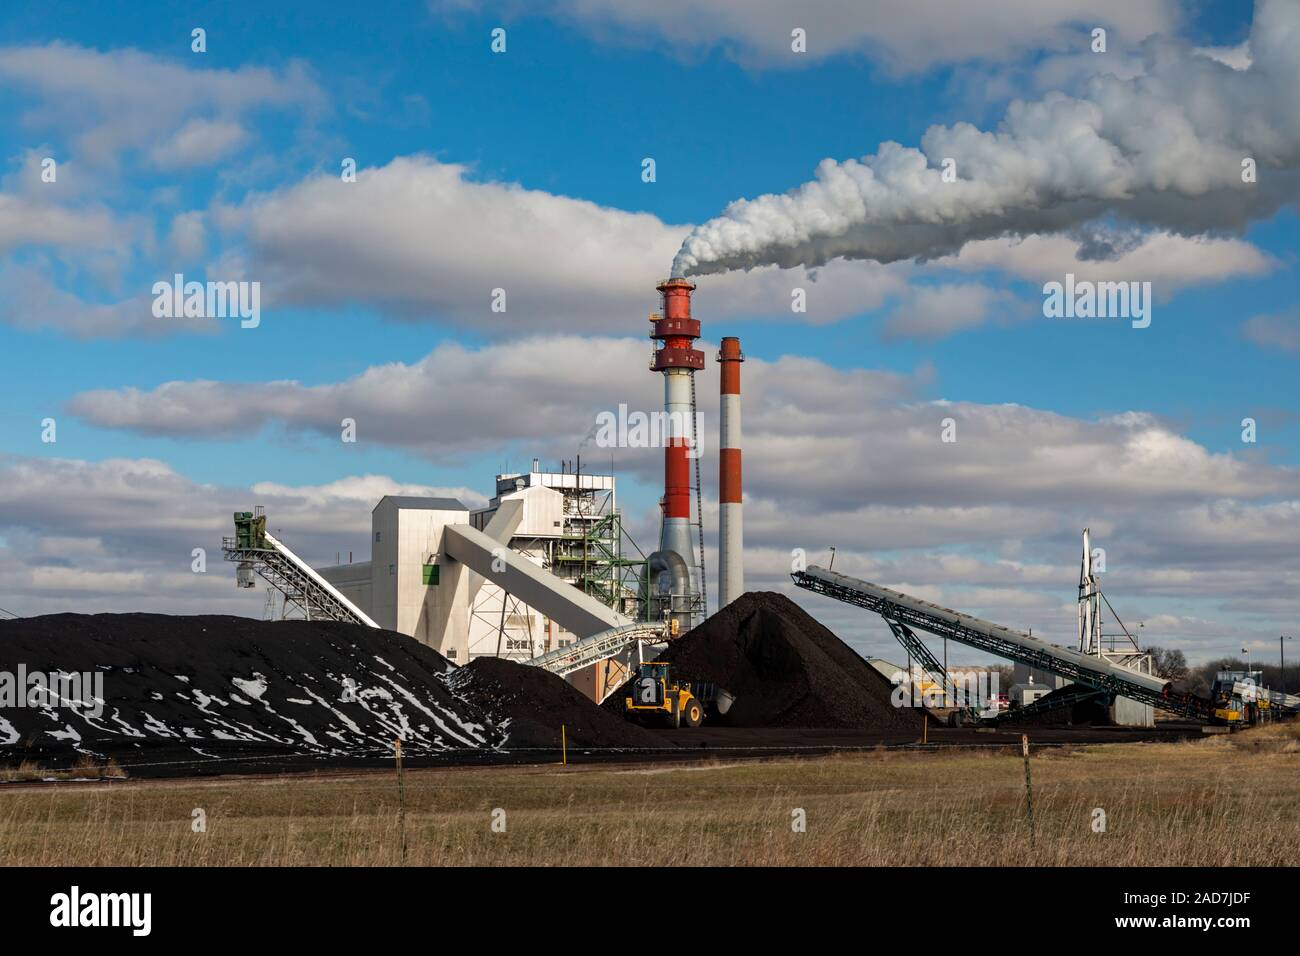 Sidney, Montana - A coal-fired power plant operated by Montana-Dakota Utilities Co., a subsidiary of MDU Resources Group. Stock Photo